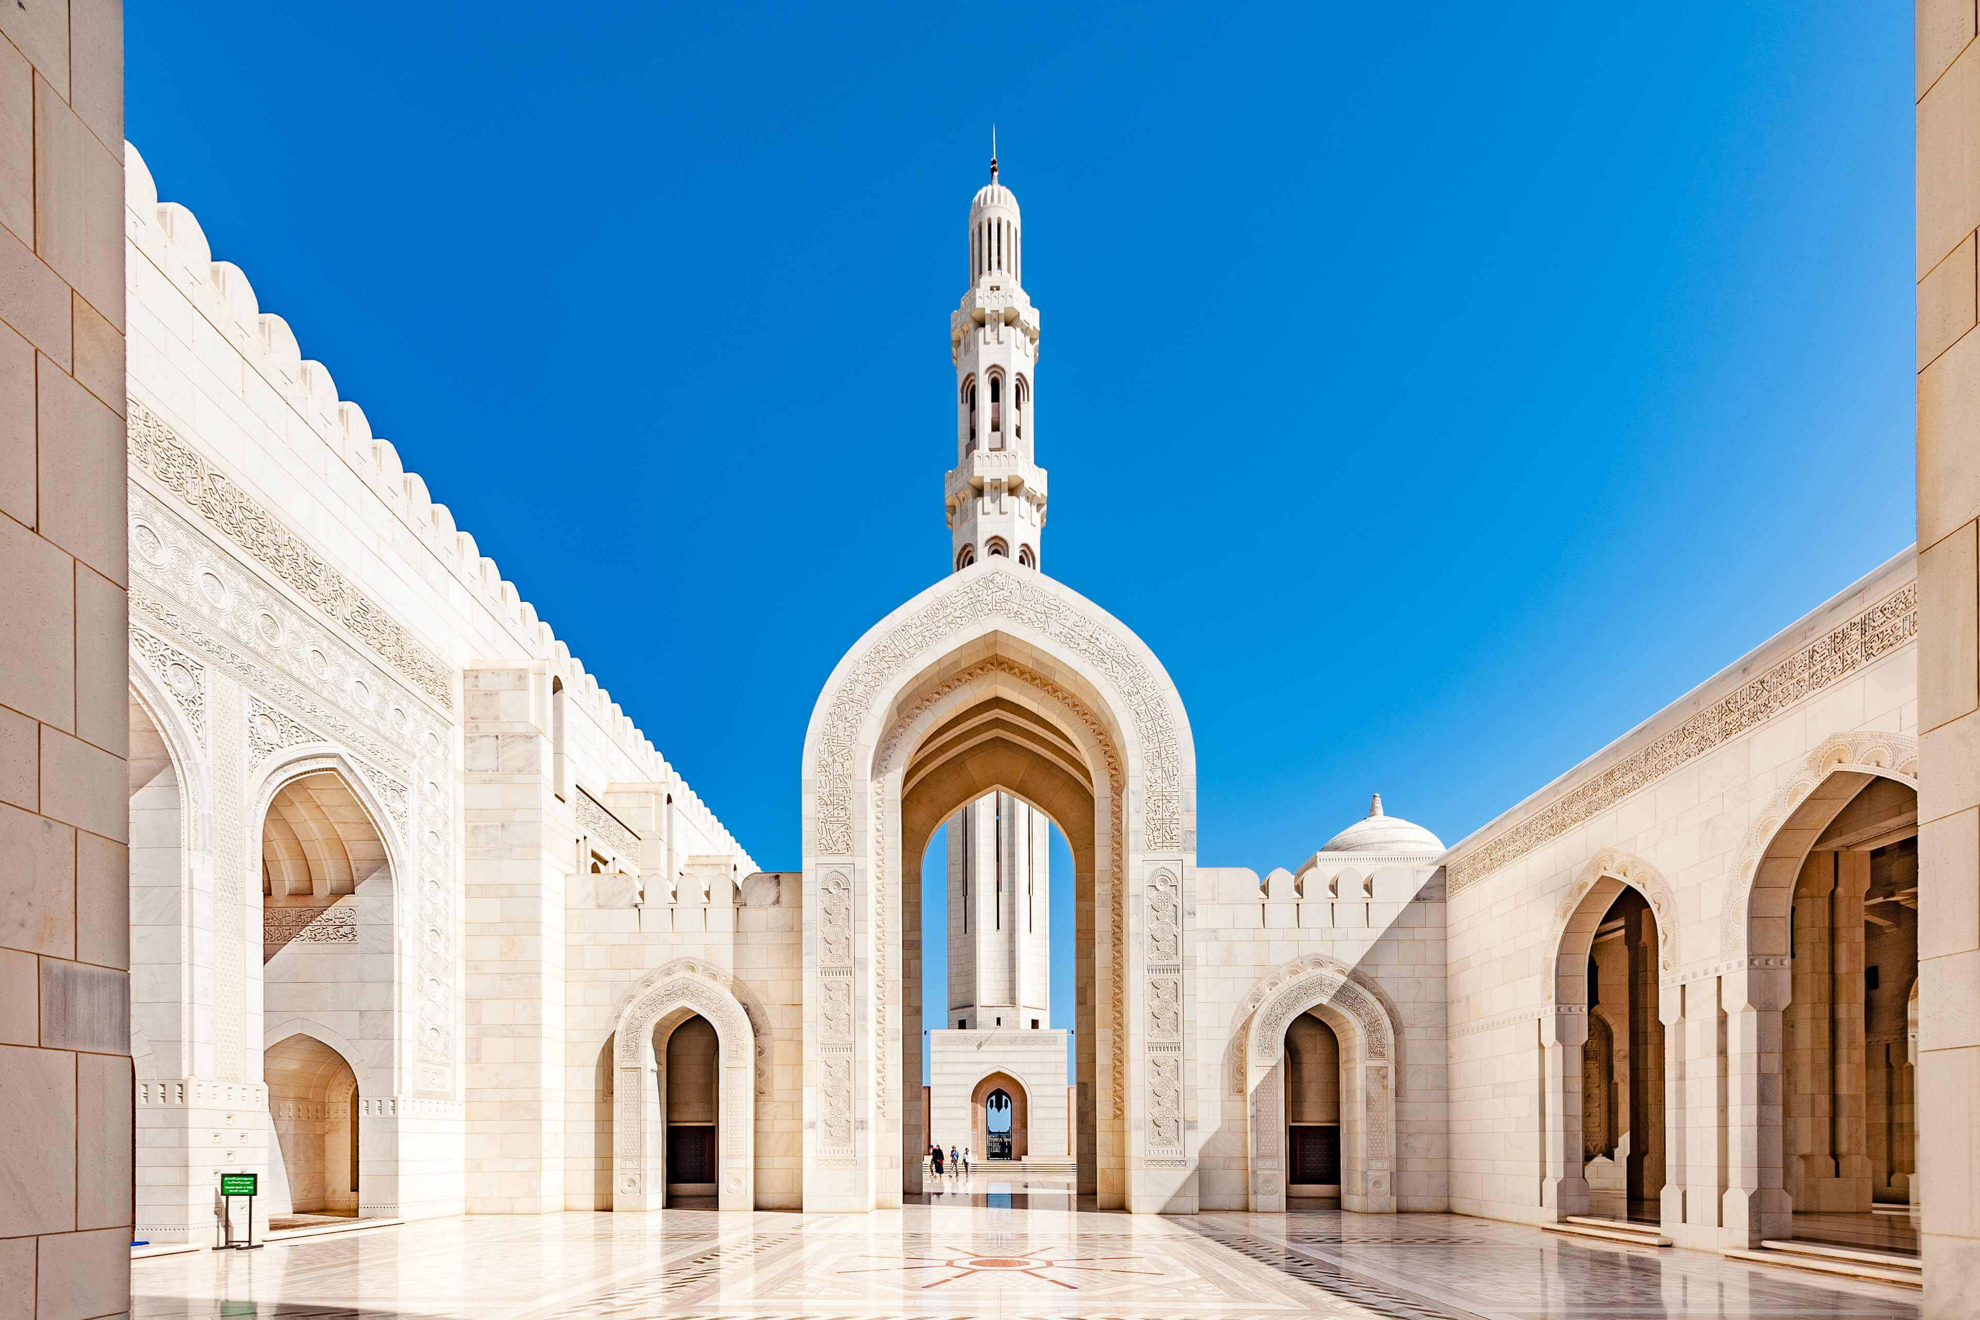 Holidays to Oman: The facade of the Sultan Qaboos Mosque in Muscat